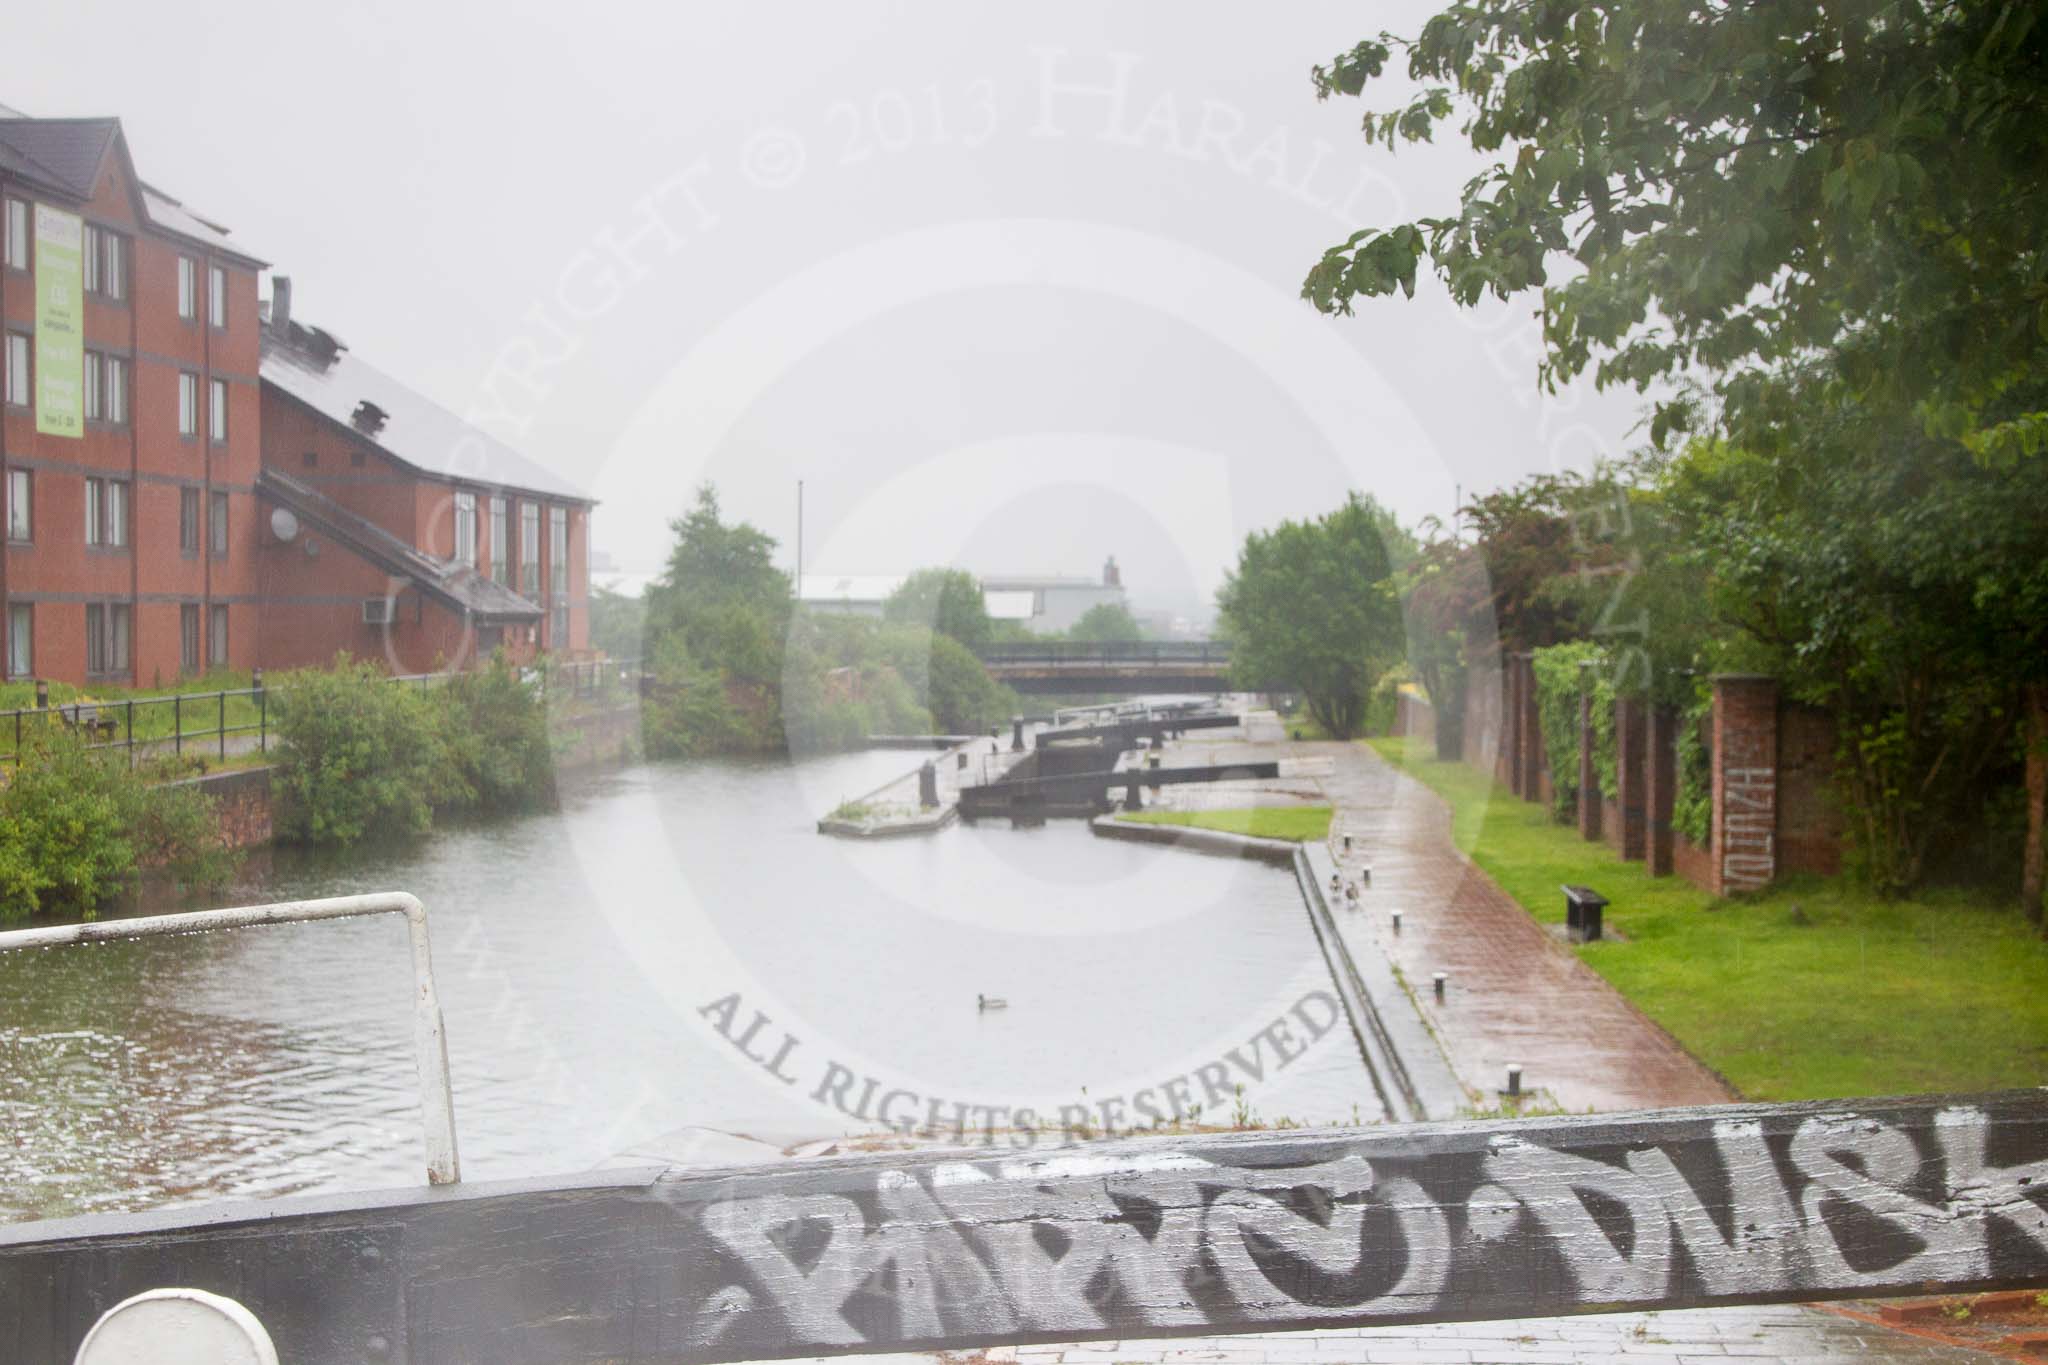 BCN Marathon Challenge 2014: Aston Lock Nr 3 on the Birmingham & Fazeley Canal at Fartmouth Middleway Bridge. From the Campanile Hotel on the left the view must be great!.
Birmingham Canal Navigation,


United Kingdom,
on 24 May 2014 at 10:29, image #107